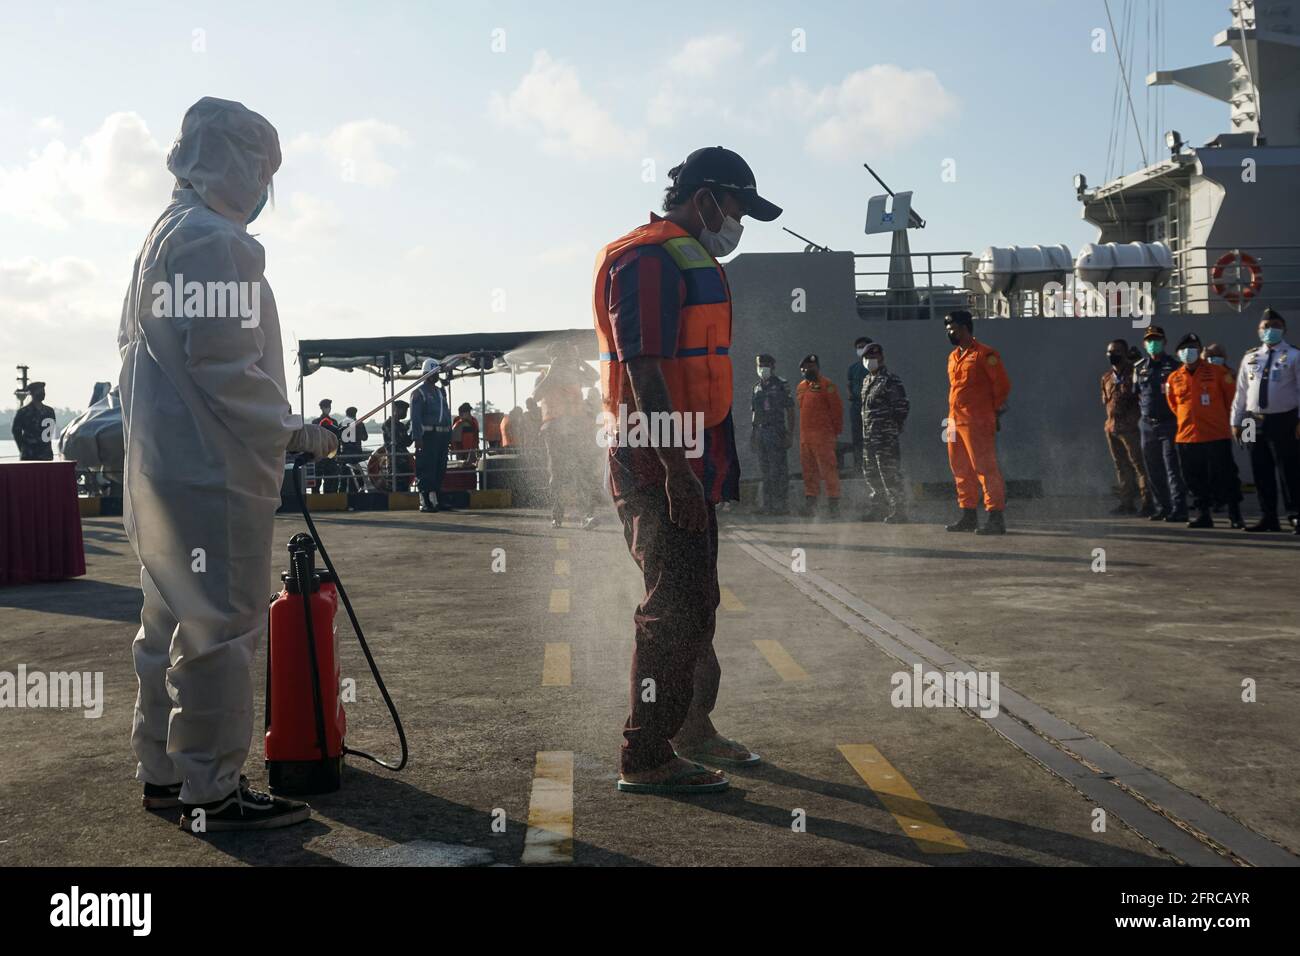 Badung, Bali, Indonesia. 21st May, 2021. Indonesian fishermen rescued from the sunken vessel disinfected due to the health protocol. Repatriation process of fishermen from Australian HMAS Anzac to Indonesian